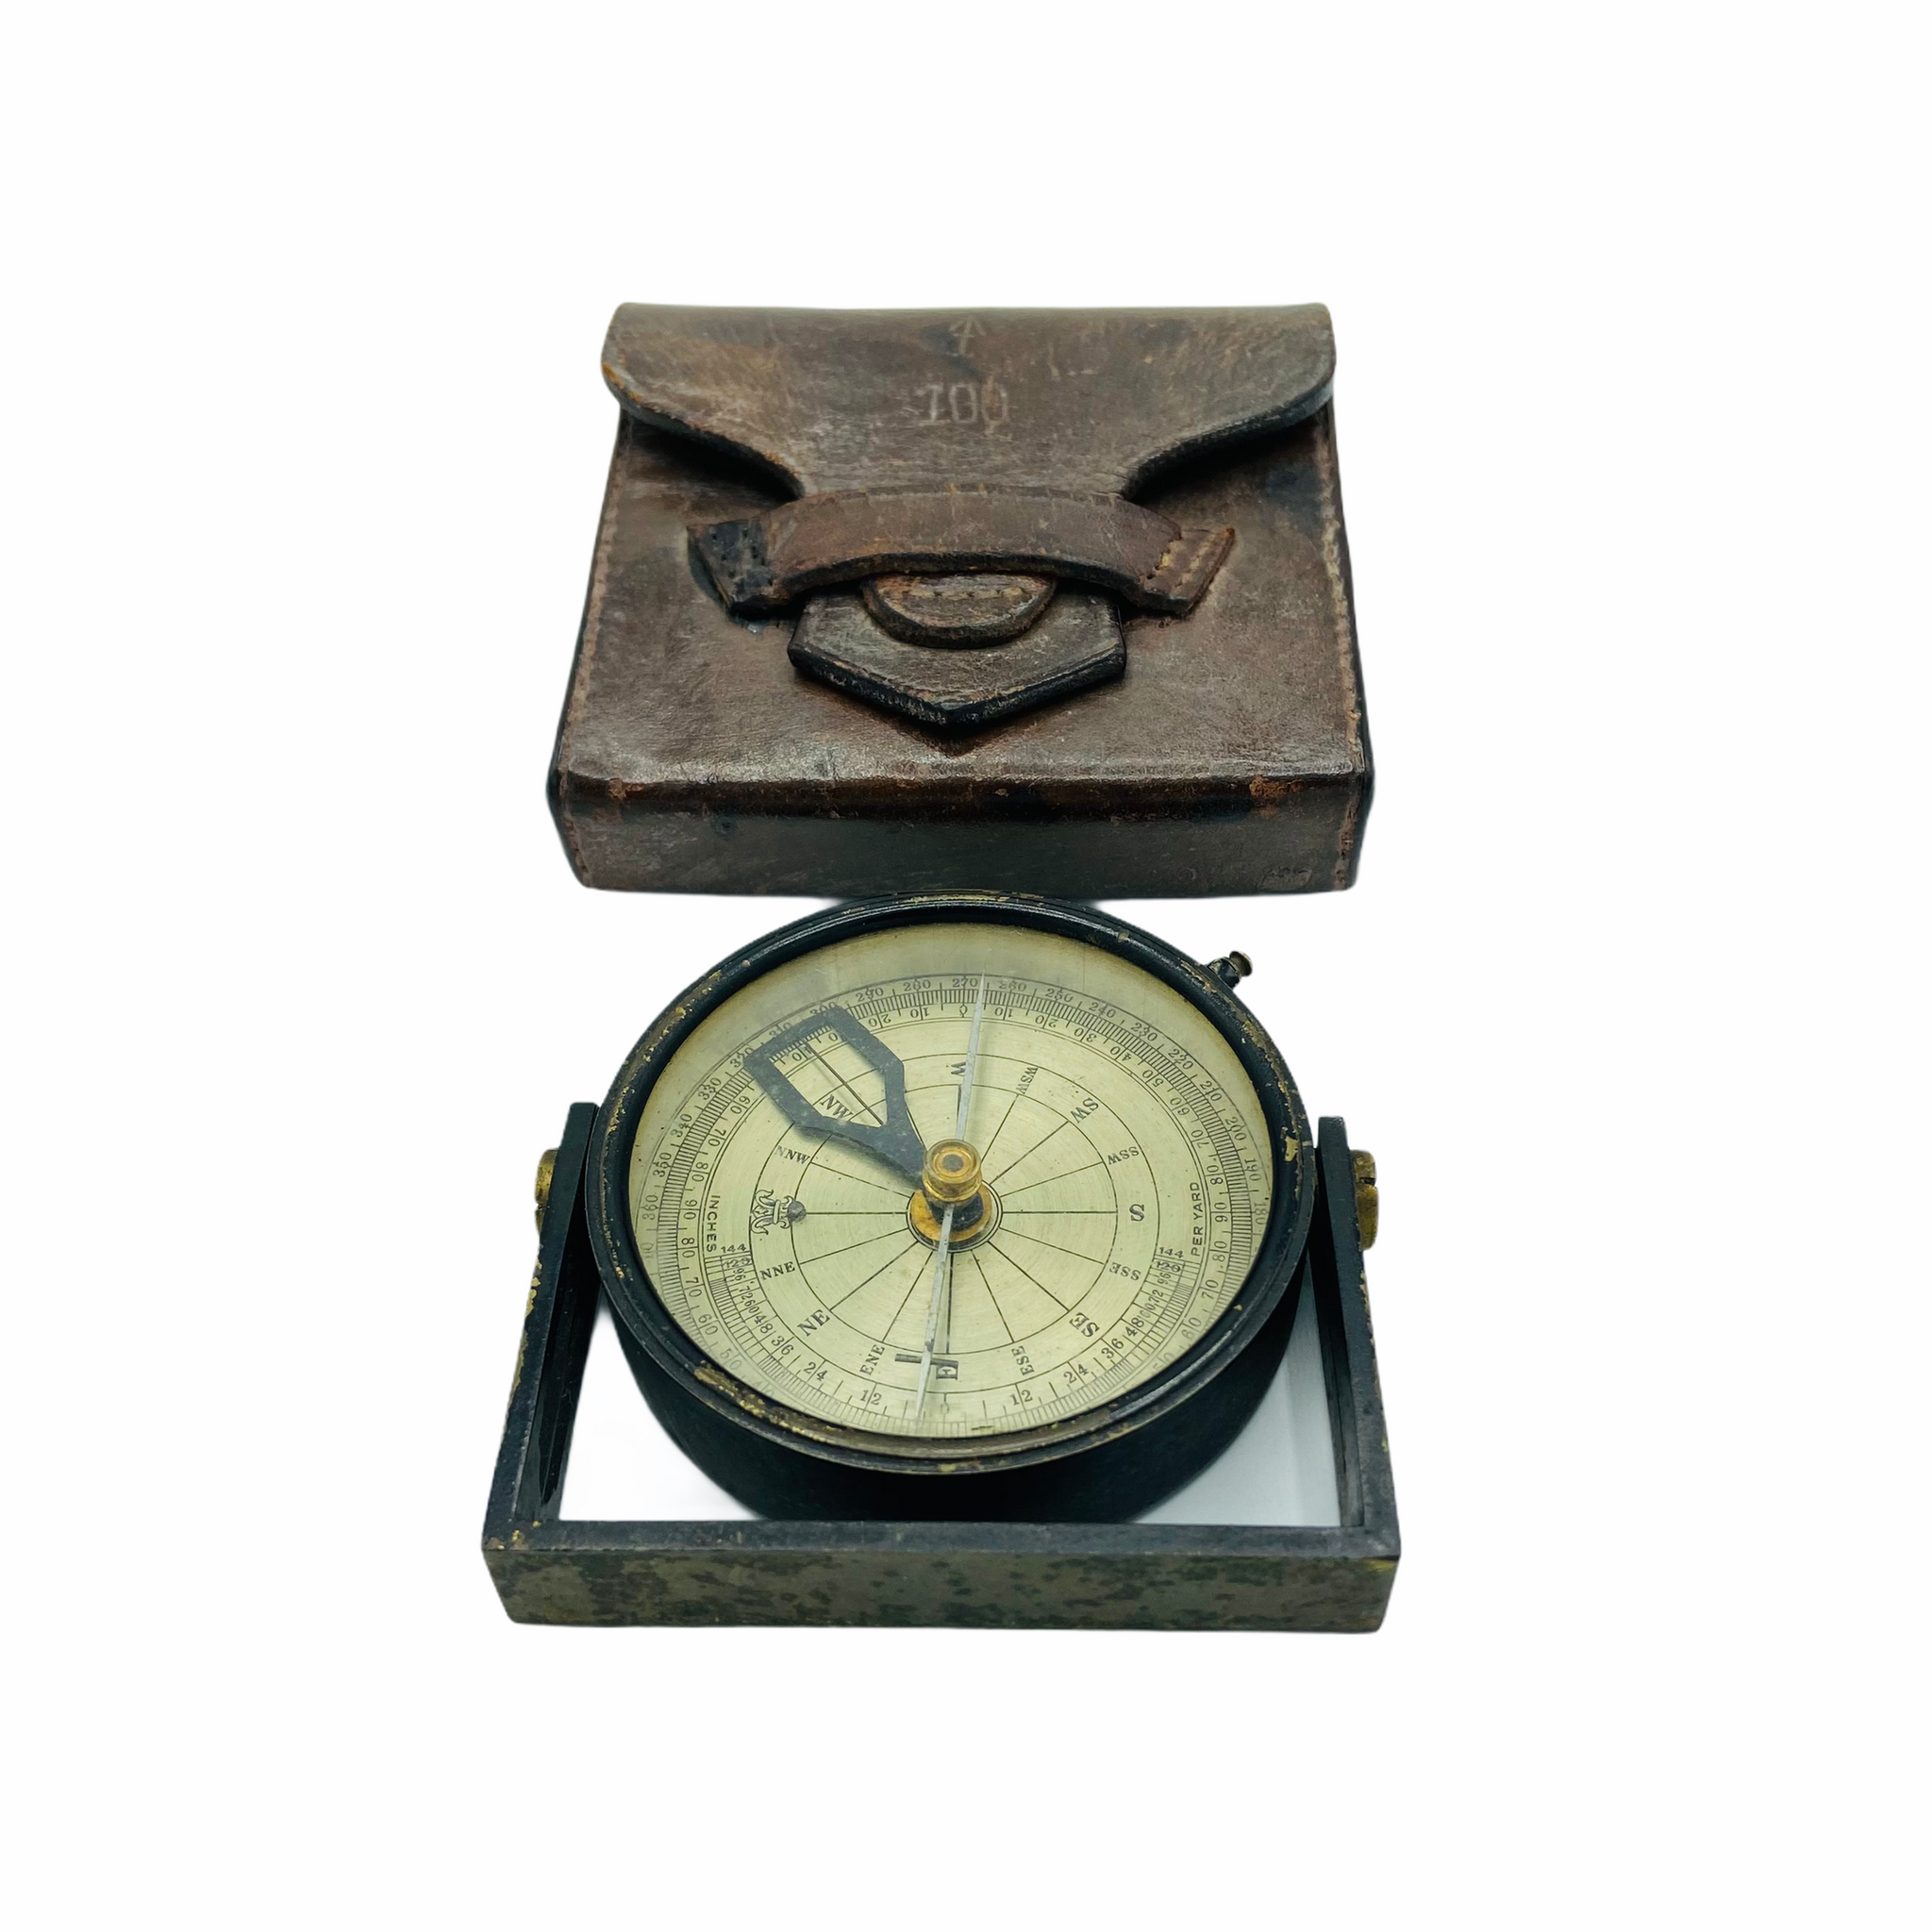 Antique British Forces circa 1928 Surveying Clinometer Compass in a Original Leather Case & Wood Box